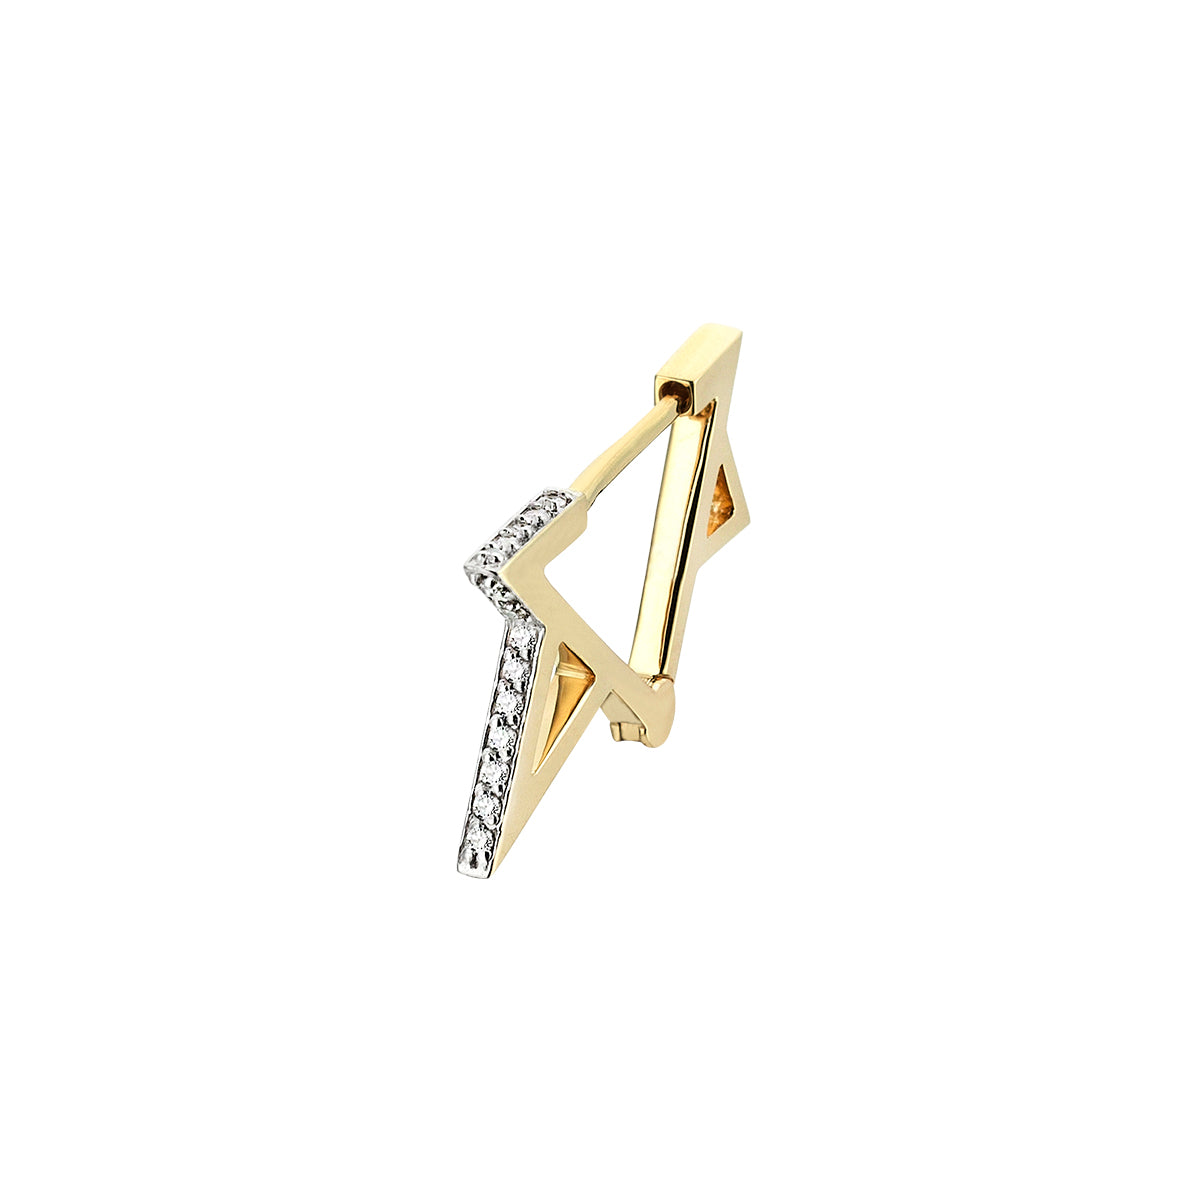 Mini Star Earring in Yellow Gold - Her Story Shop